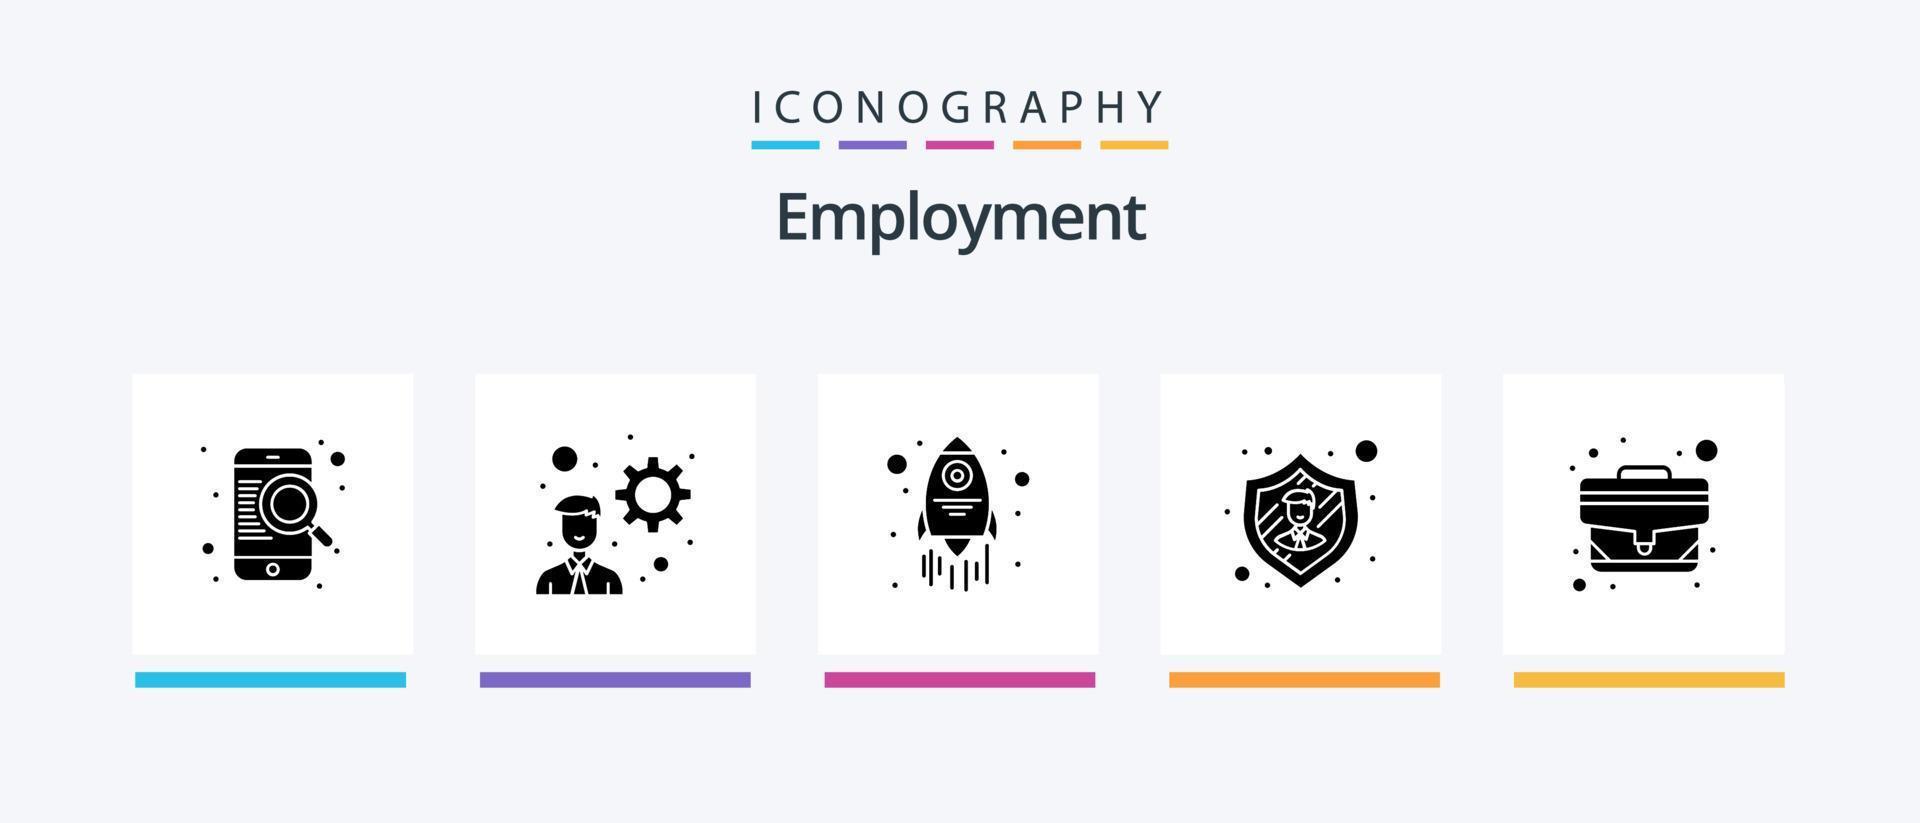 Employment Glyph 5 Icon Pack Including . office. rocket. case. security. Creative Icons Design vector